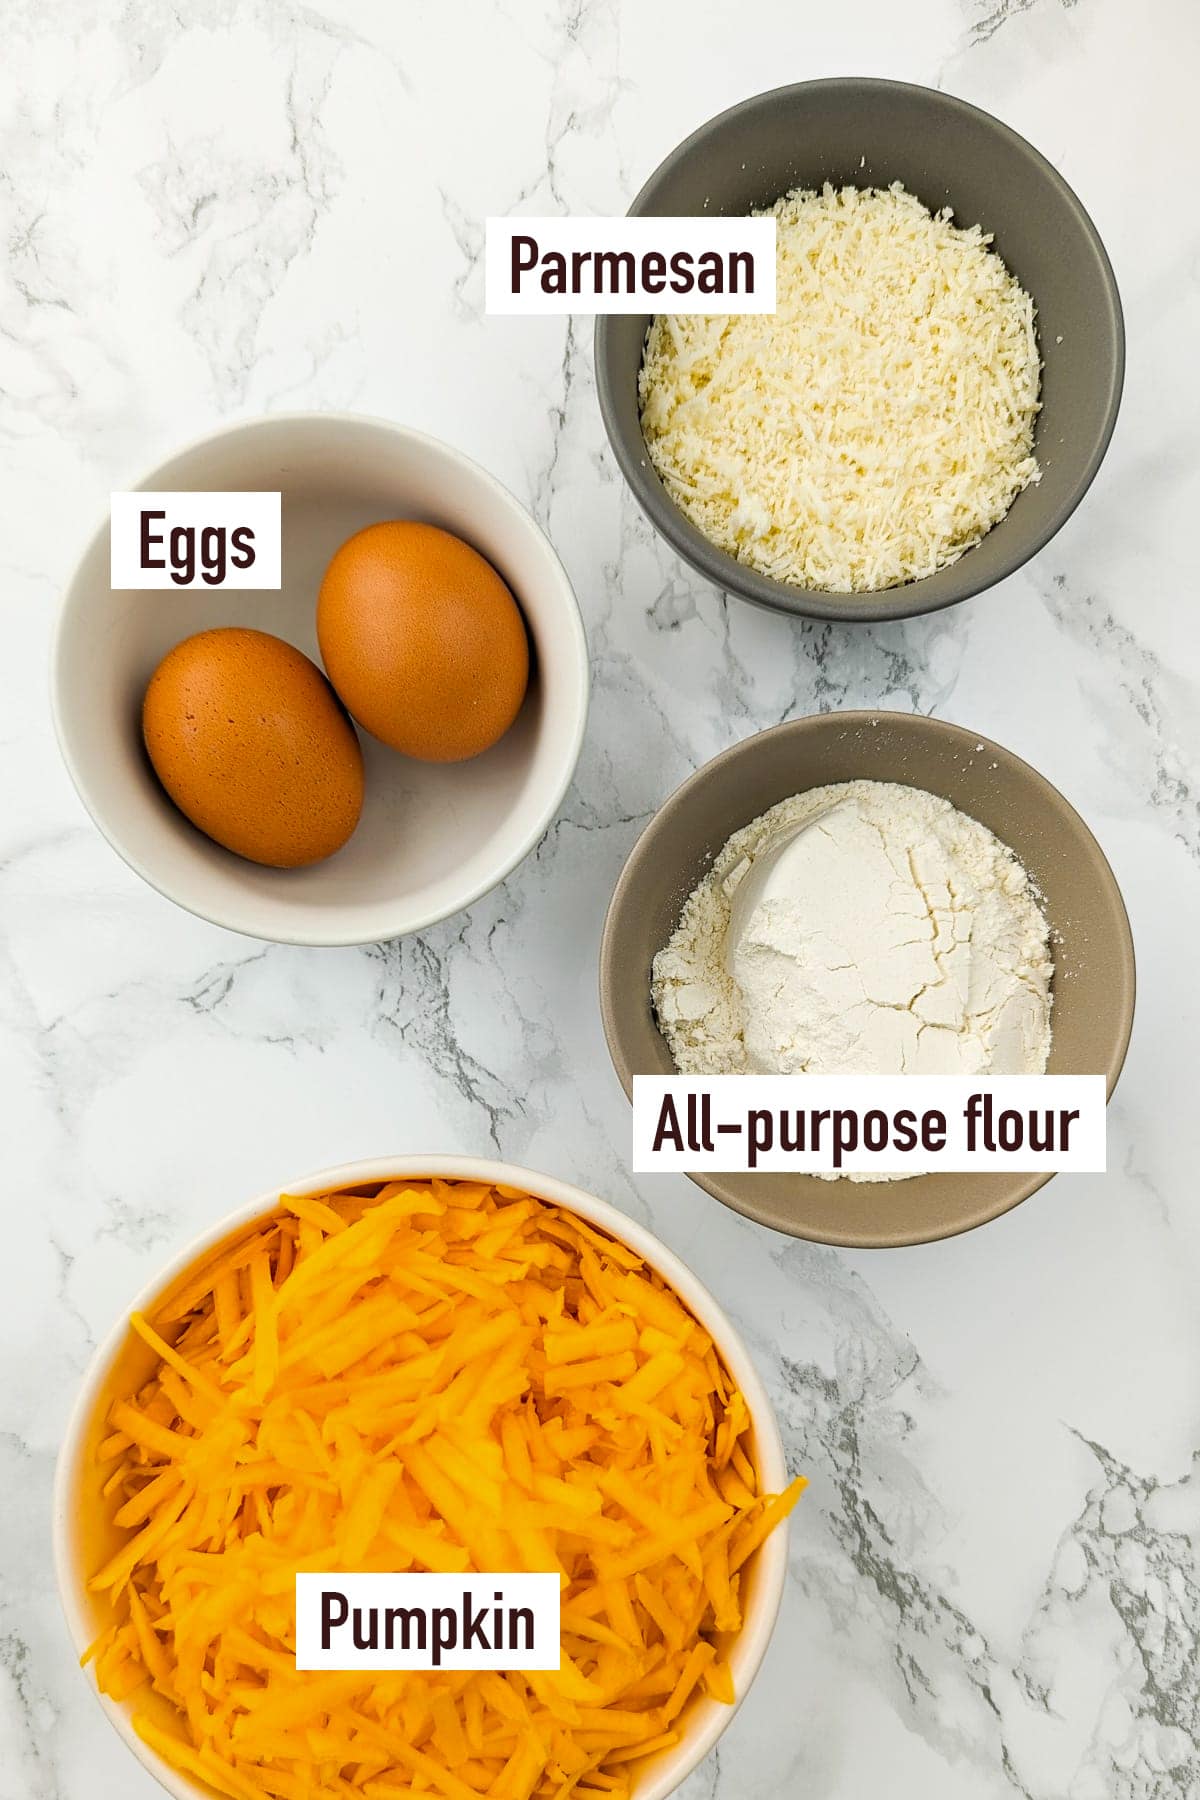 A plate with grated pumpkin, flour, parmesan and two eggs on a white marble table.